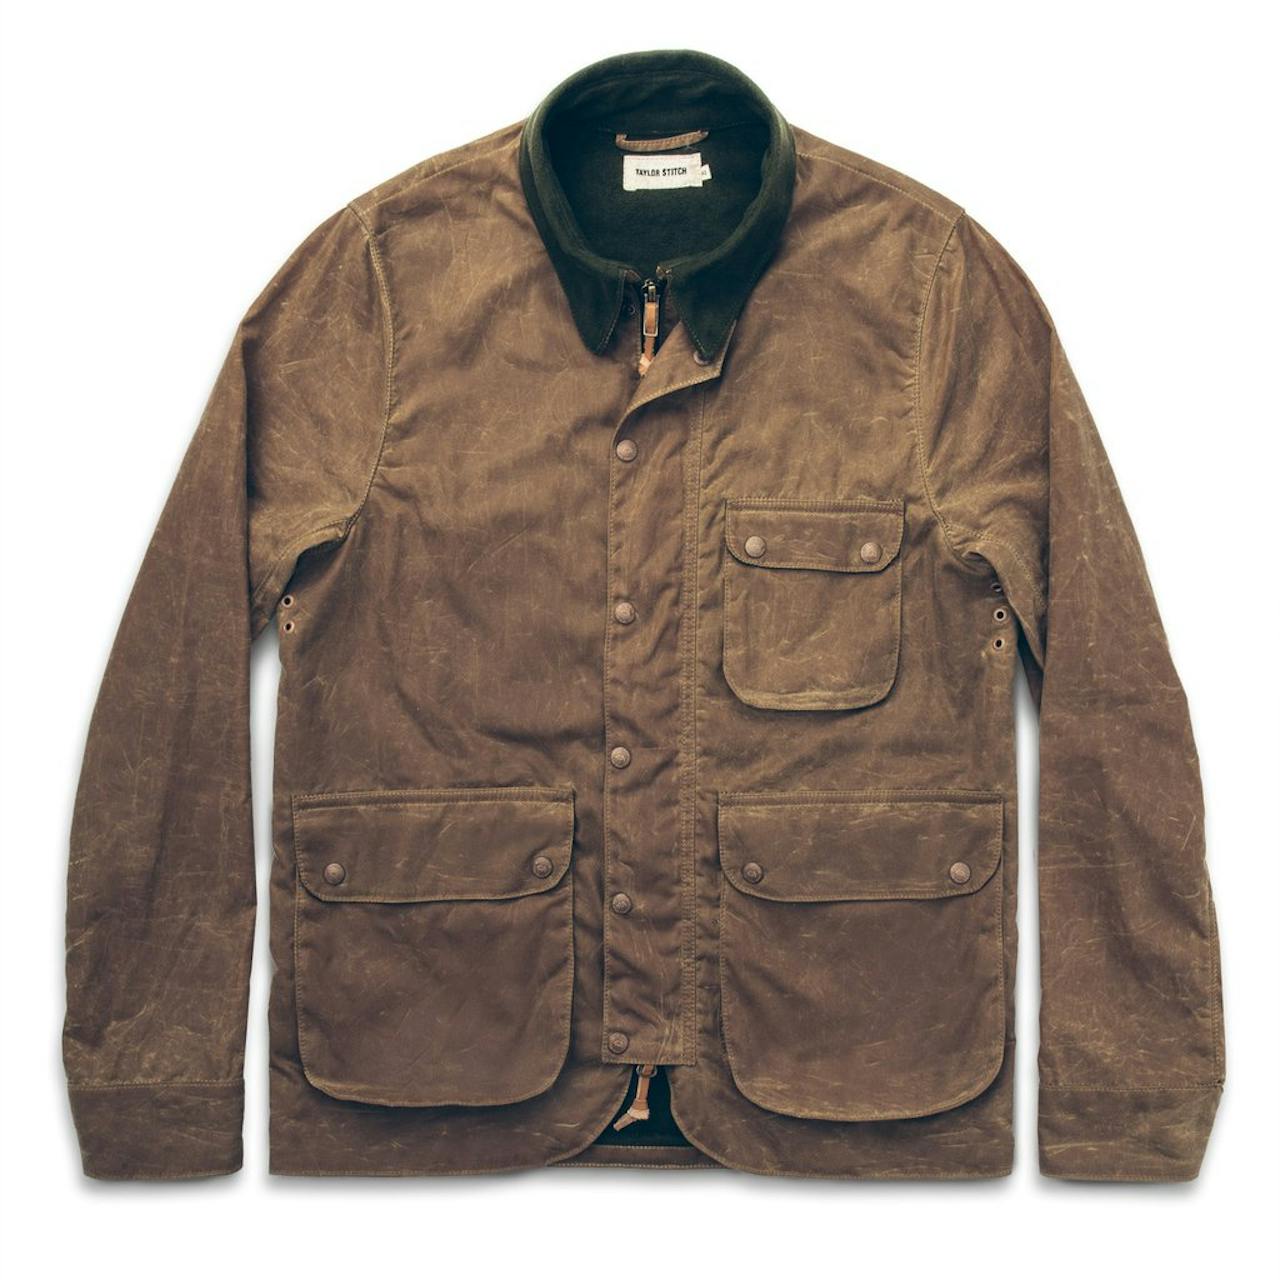 Taylor Stitch The Rover Jacket